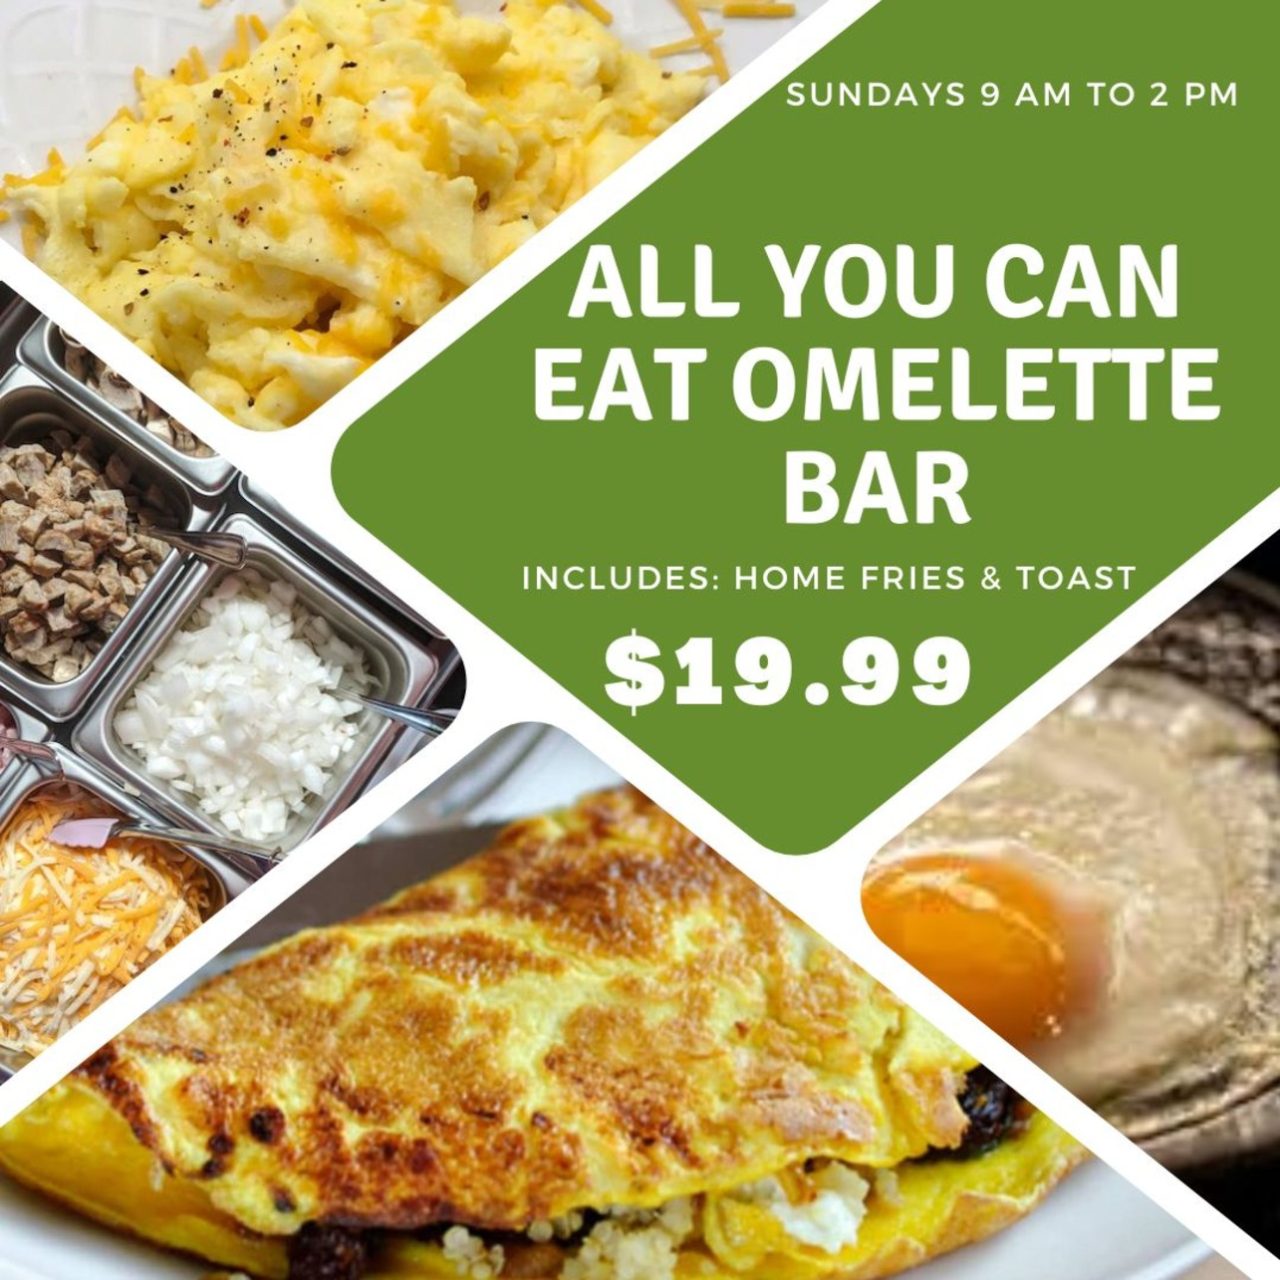 All You Can Eat Omelette Bar